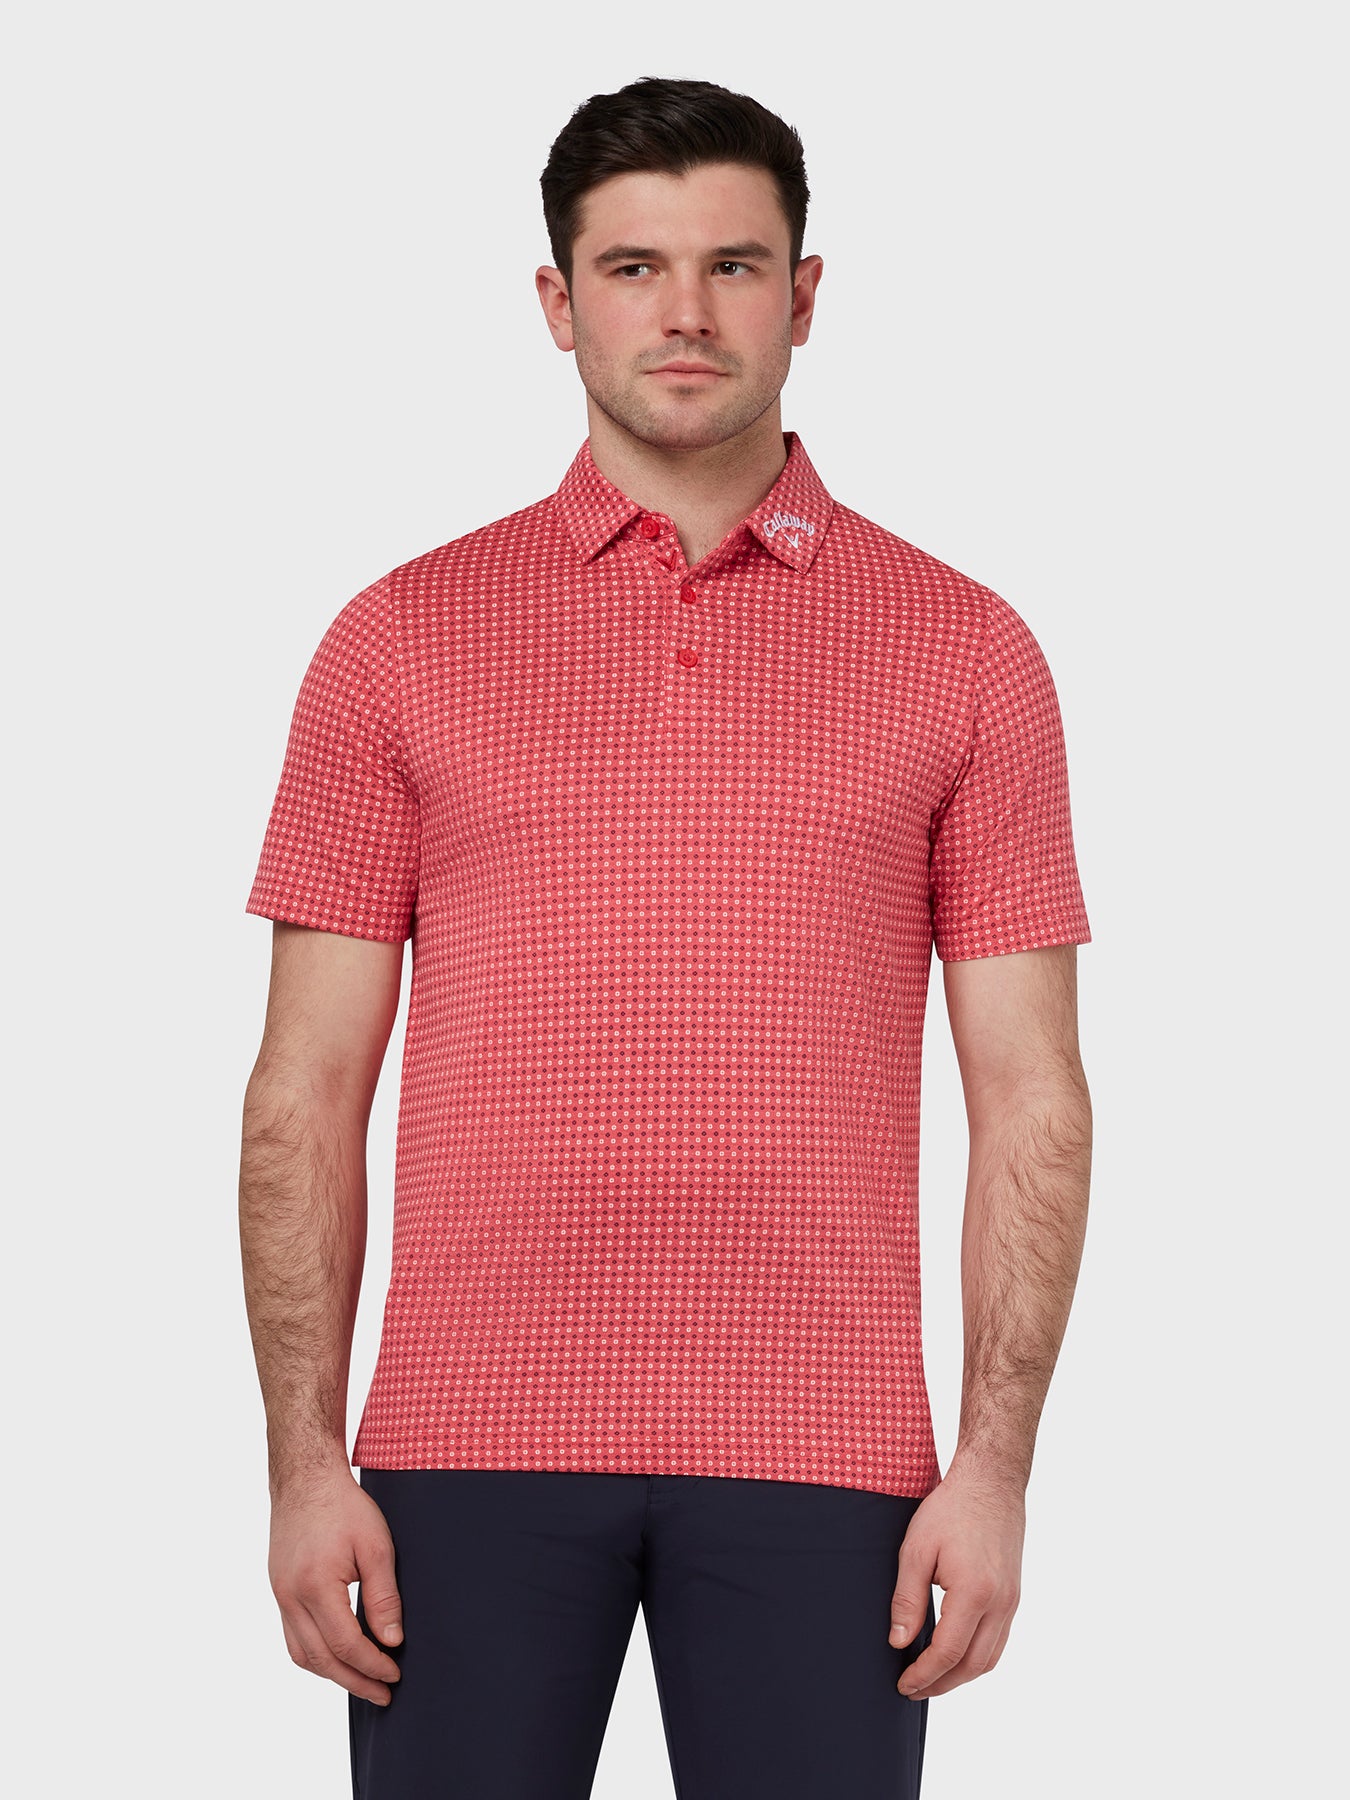 View Soft Touch Micro Print Polo In Teaberry Heather information